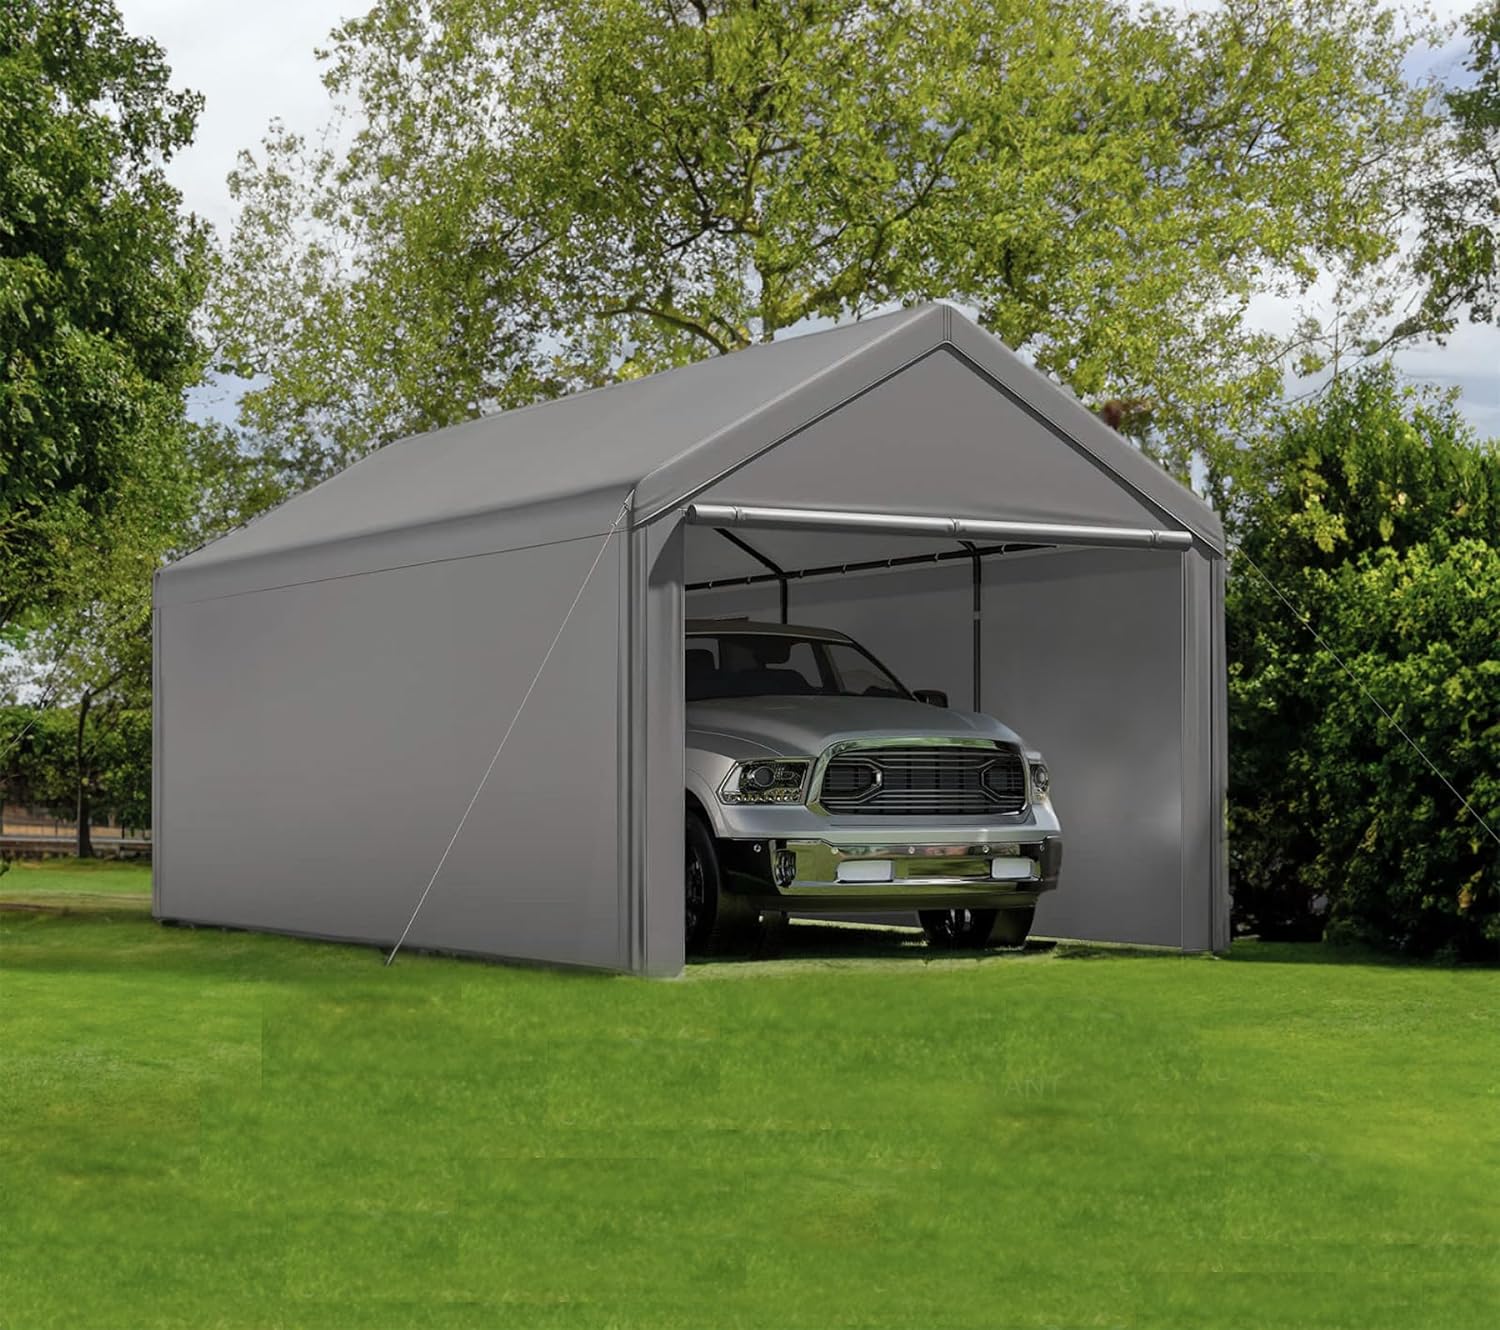 Outdoor Carport 10x20ft Heavy Duty Canopy Storage Shed Review